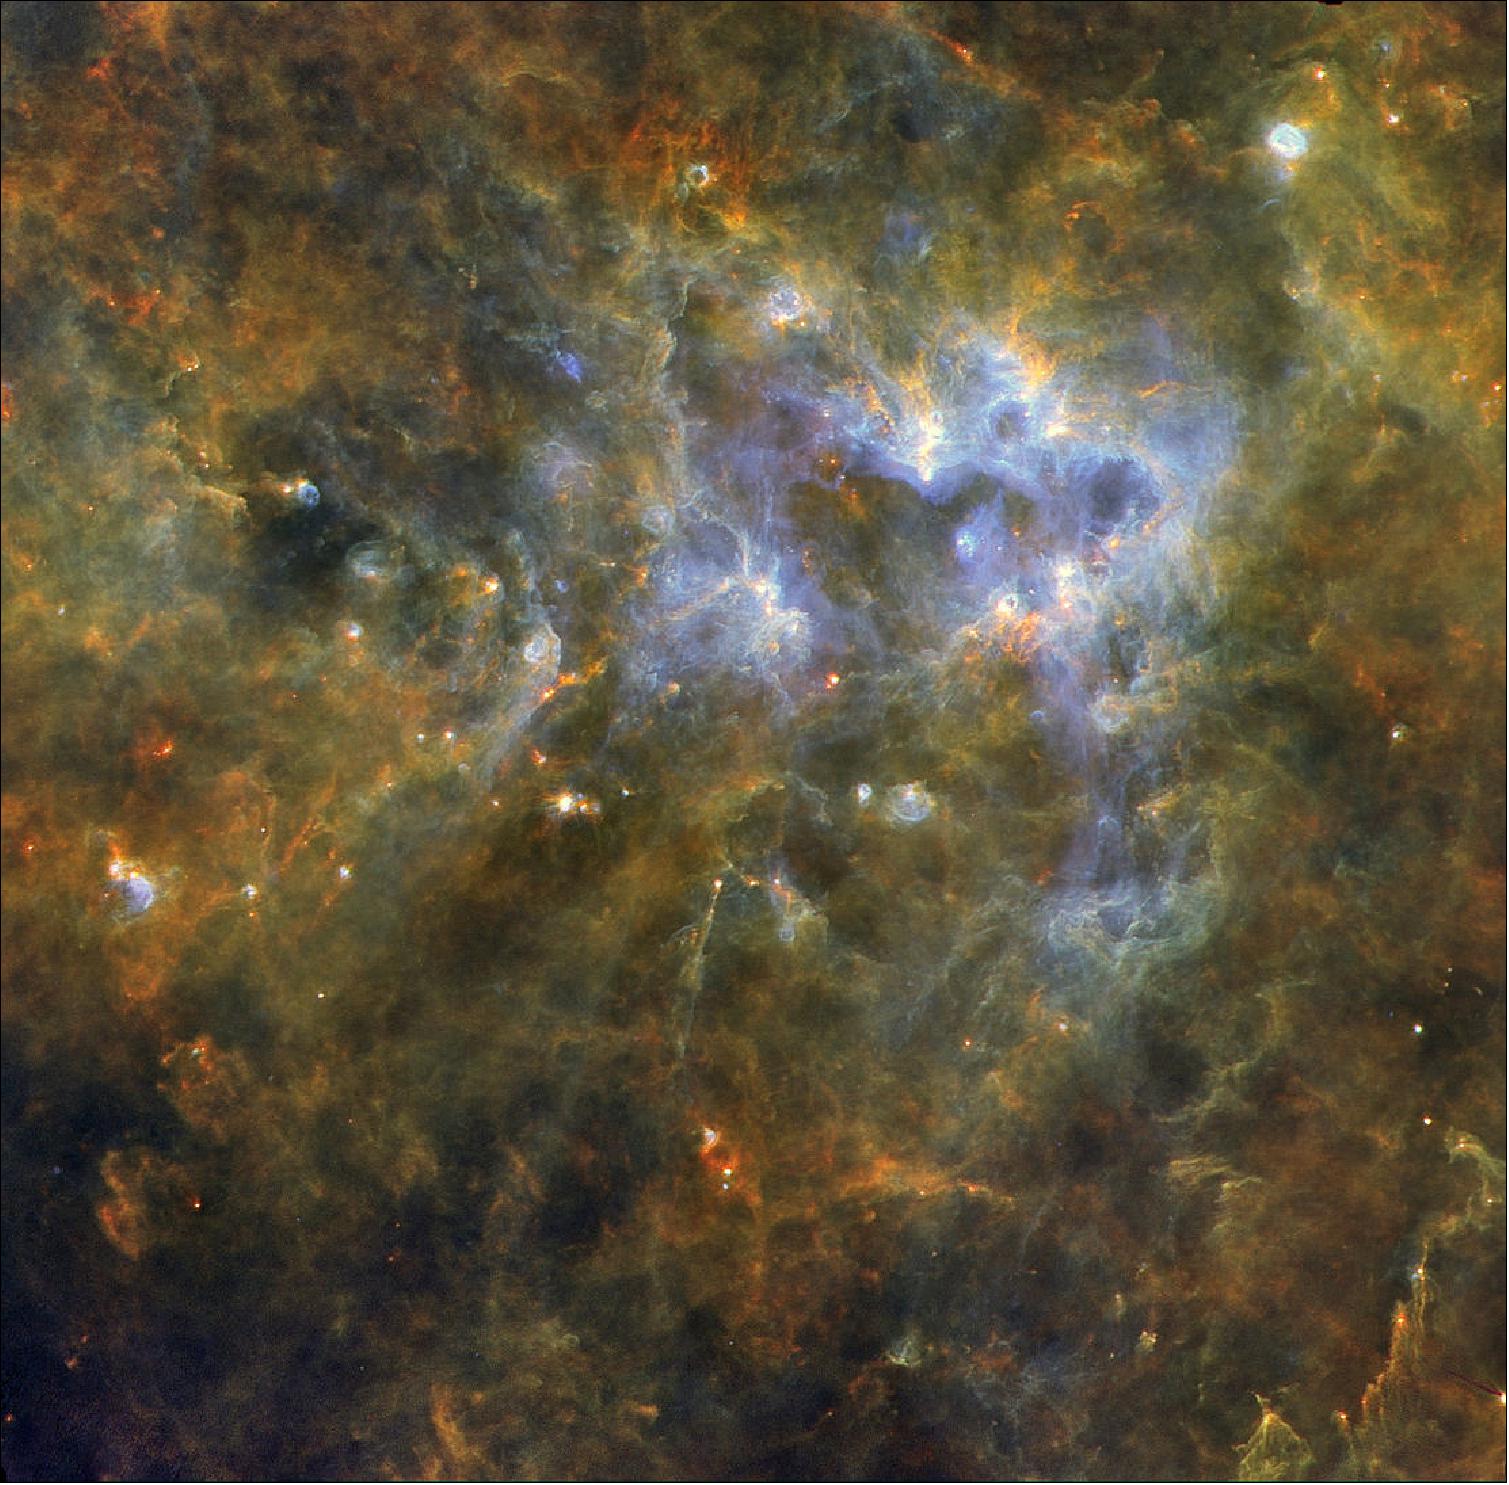 Figure 28: This image, obtained as part of Hi-GAL – the Herschel infrared Galactic Plane Survey, combines observations at three different wavelengths: 70 µm (blue), 160 µm (green) and 250 µm (red), image credit: ESA/Herschel/PACS, SPIRE/Hi-GAL Project. Acknowledgement: UNIMAP / L. Piazzo, La Sapienza – Università di Roma; E. Schisano / G. Li Causi, IAPS/INAF, Italy